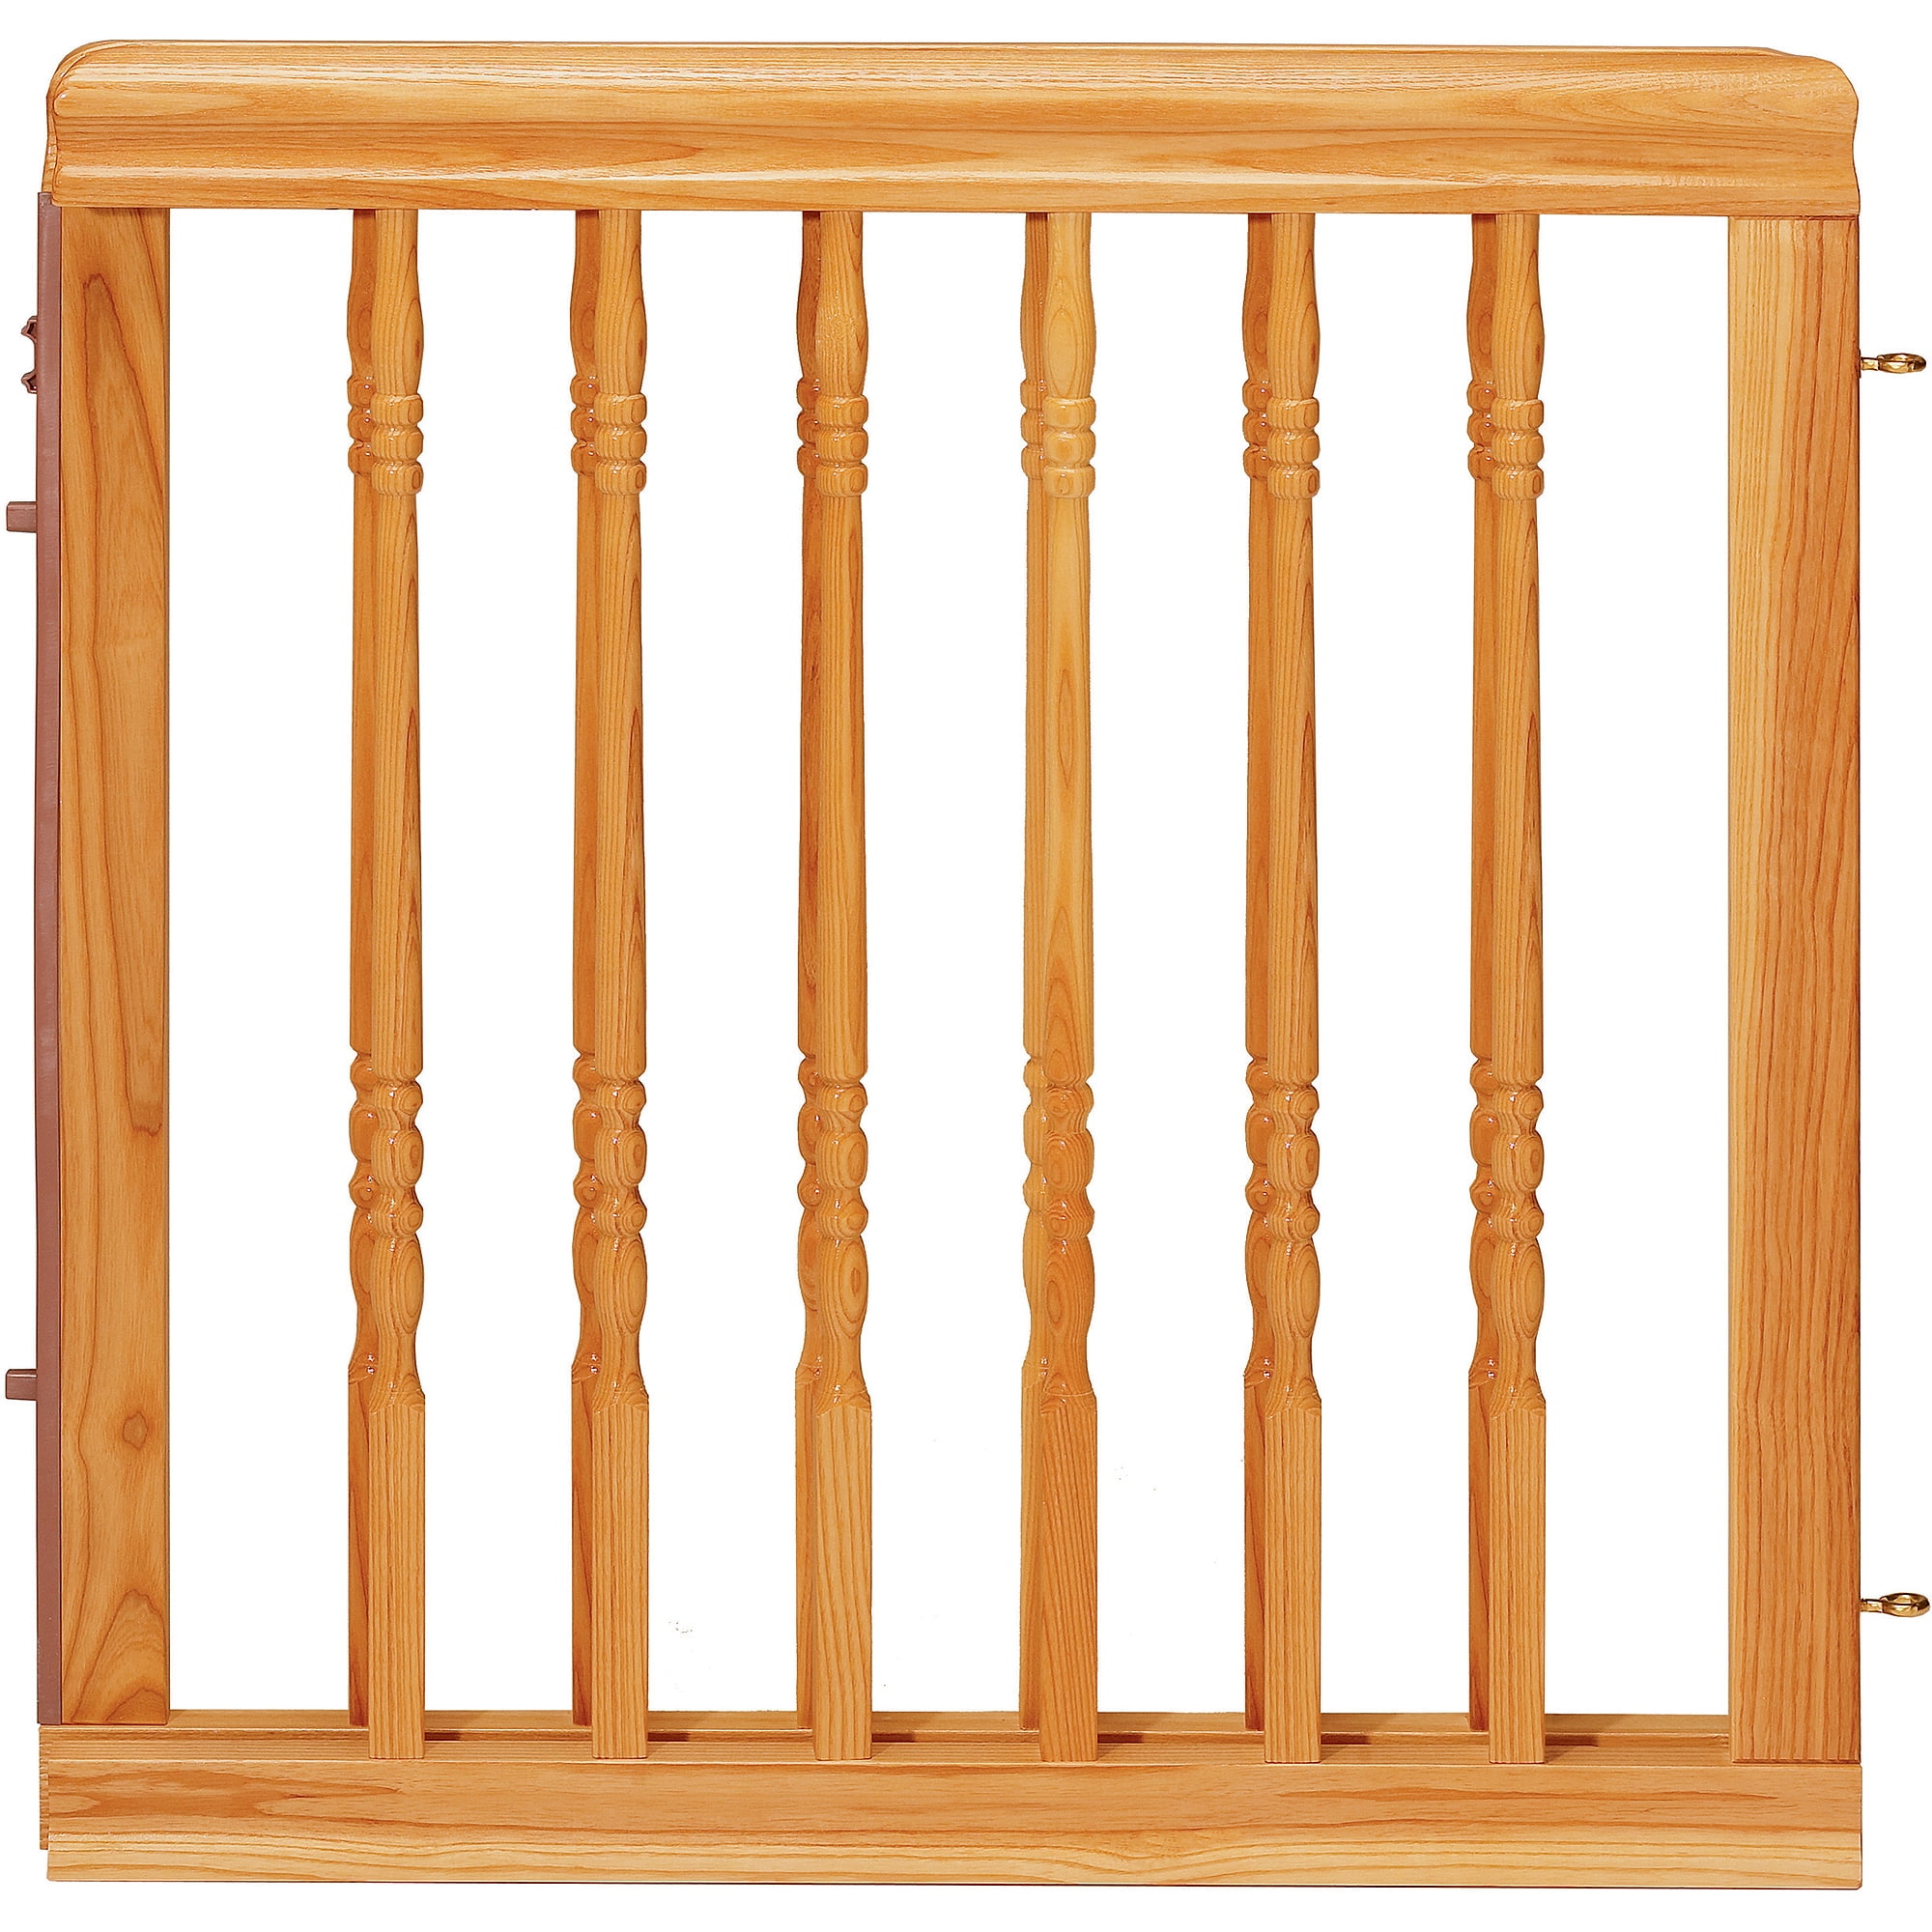 Evenflo Home Decor Wood Swing Gate, Wooden Swing Gate For Stairs